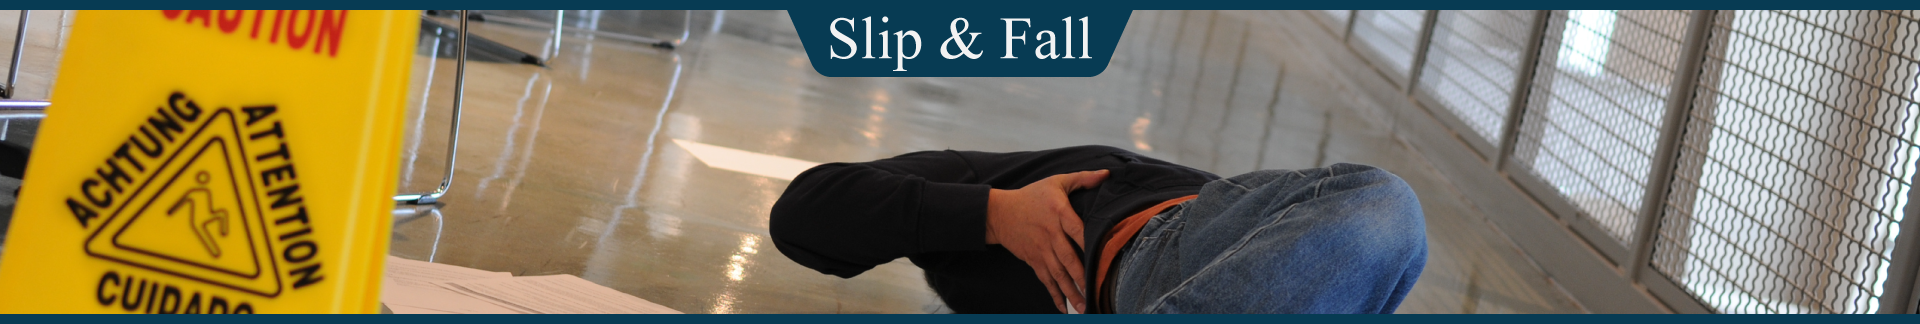 Slip and Fall The Peña Law Firm Miami